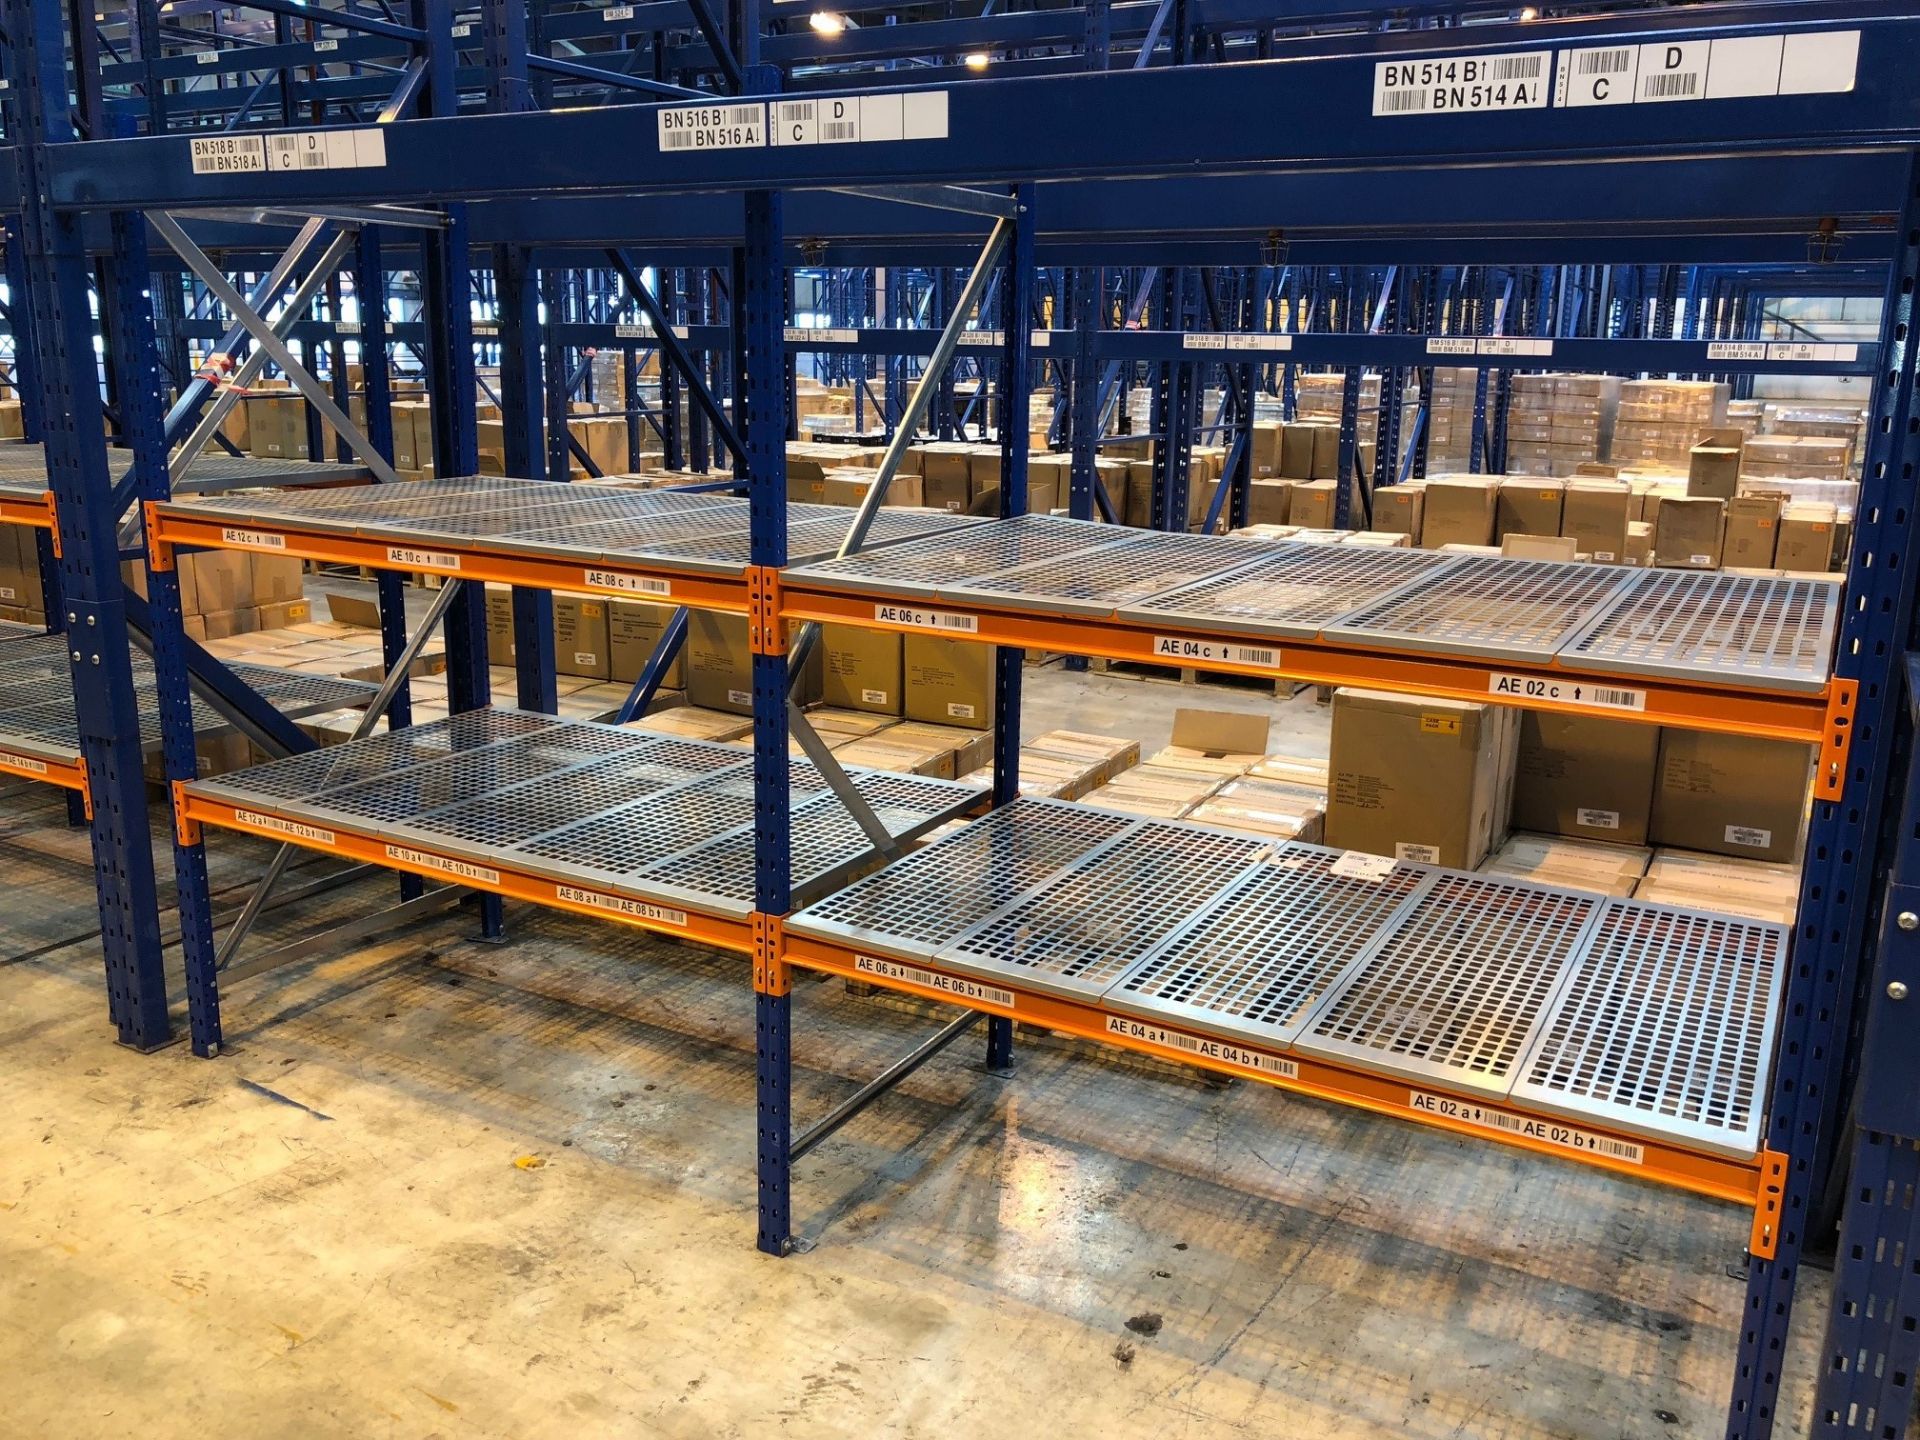 2 x Bays of Small Warehouse Racking/Shelving - Excellent Condition (L1500xH2000xD900mm - 3 x Upright